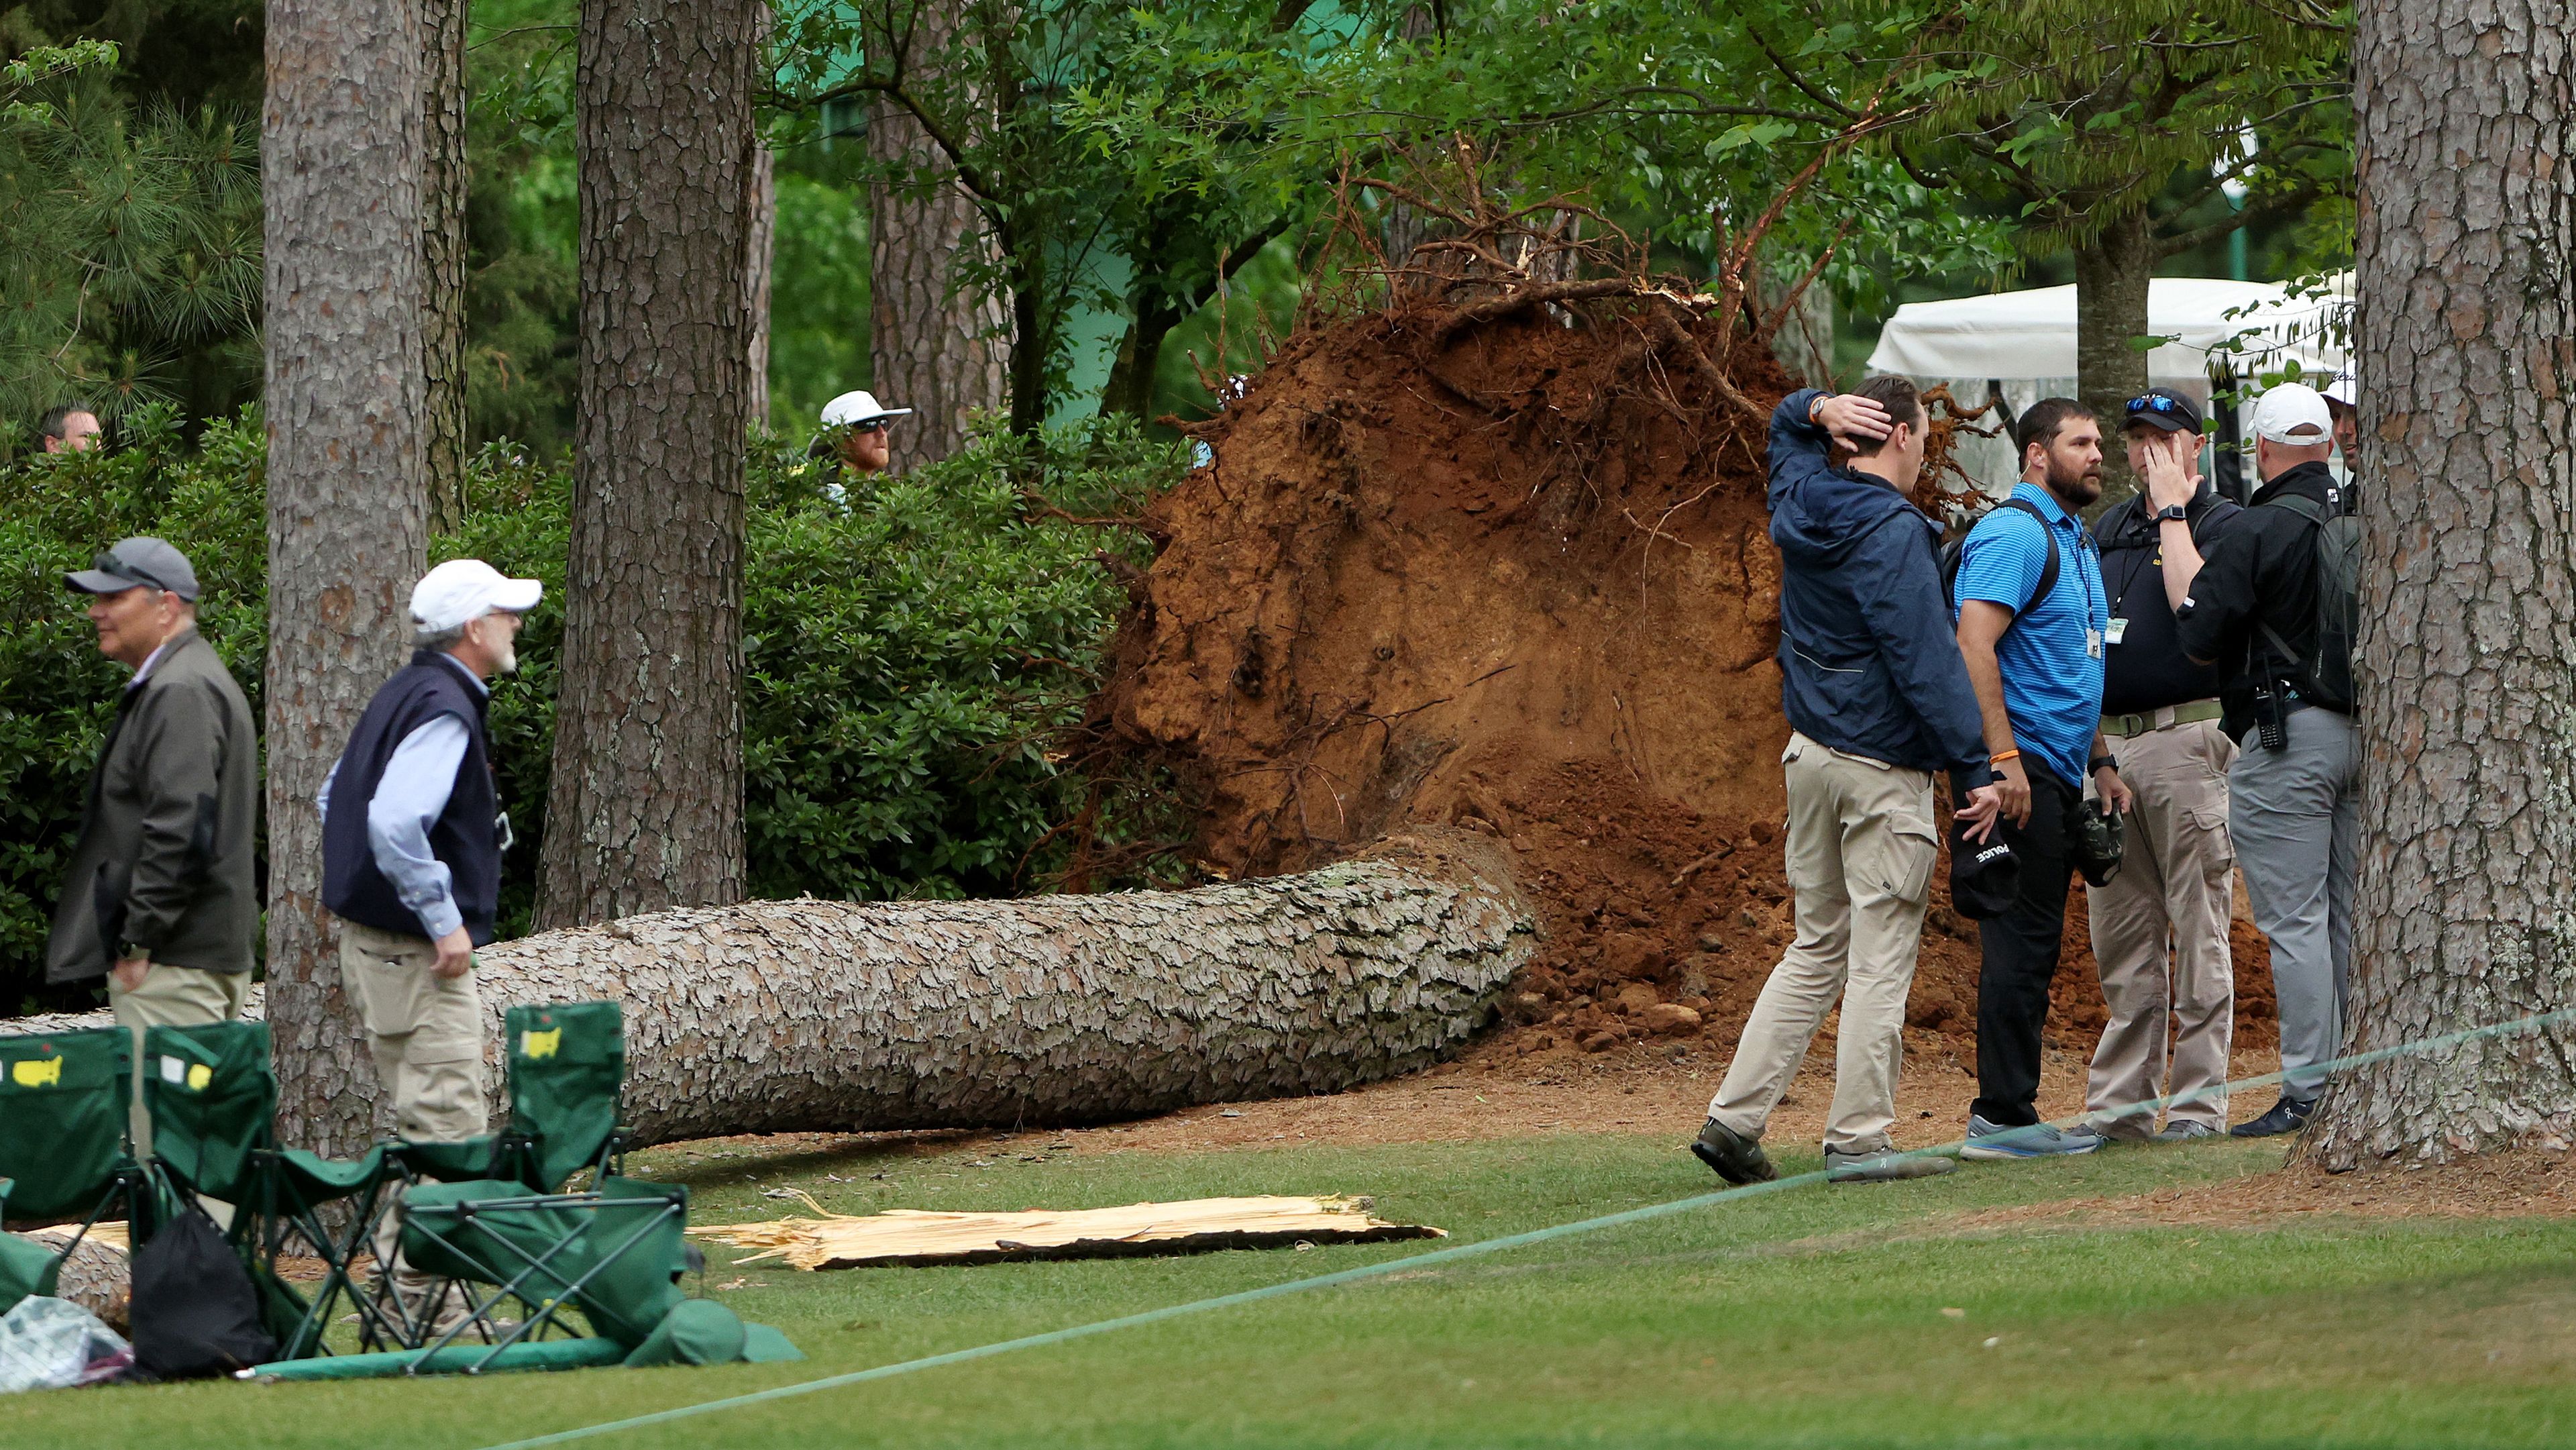 AUGUSTA, GEORGIA - APRIL 07: Course officials look over fallen trees on the 17th tee during the second round of the 2023 Masters Tournament at Augusta National Golf Club on April 07, 2023 in Augusta, Georgia. (Photo by Patrick Smith/Getty Images)